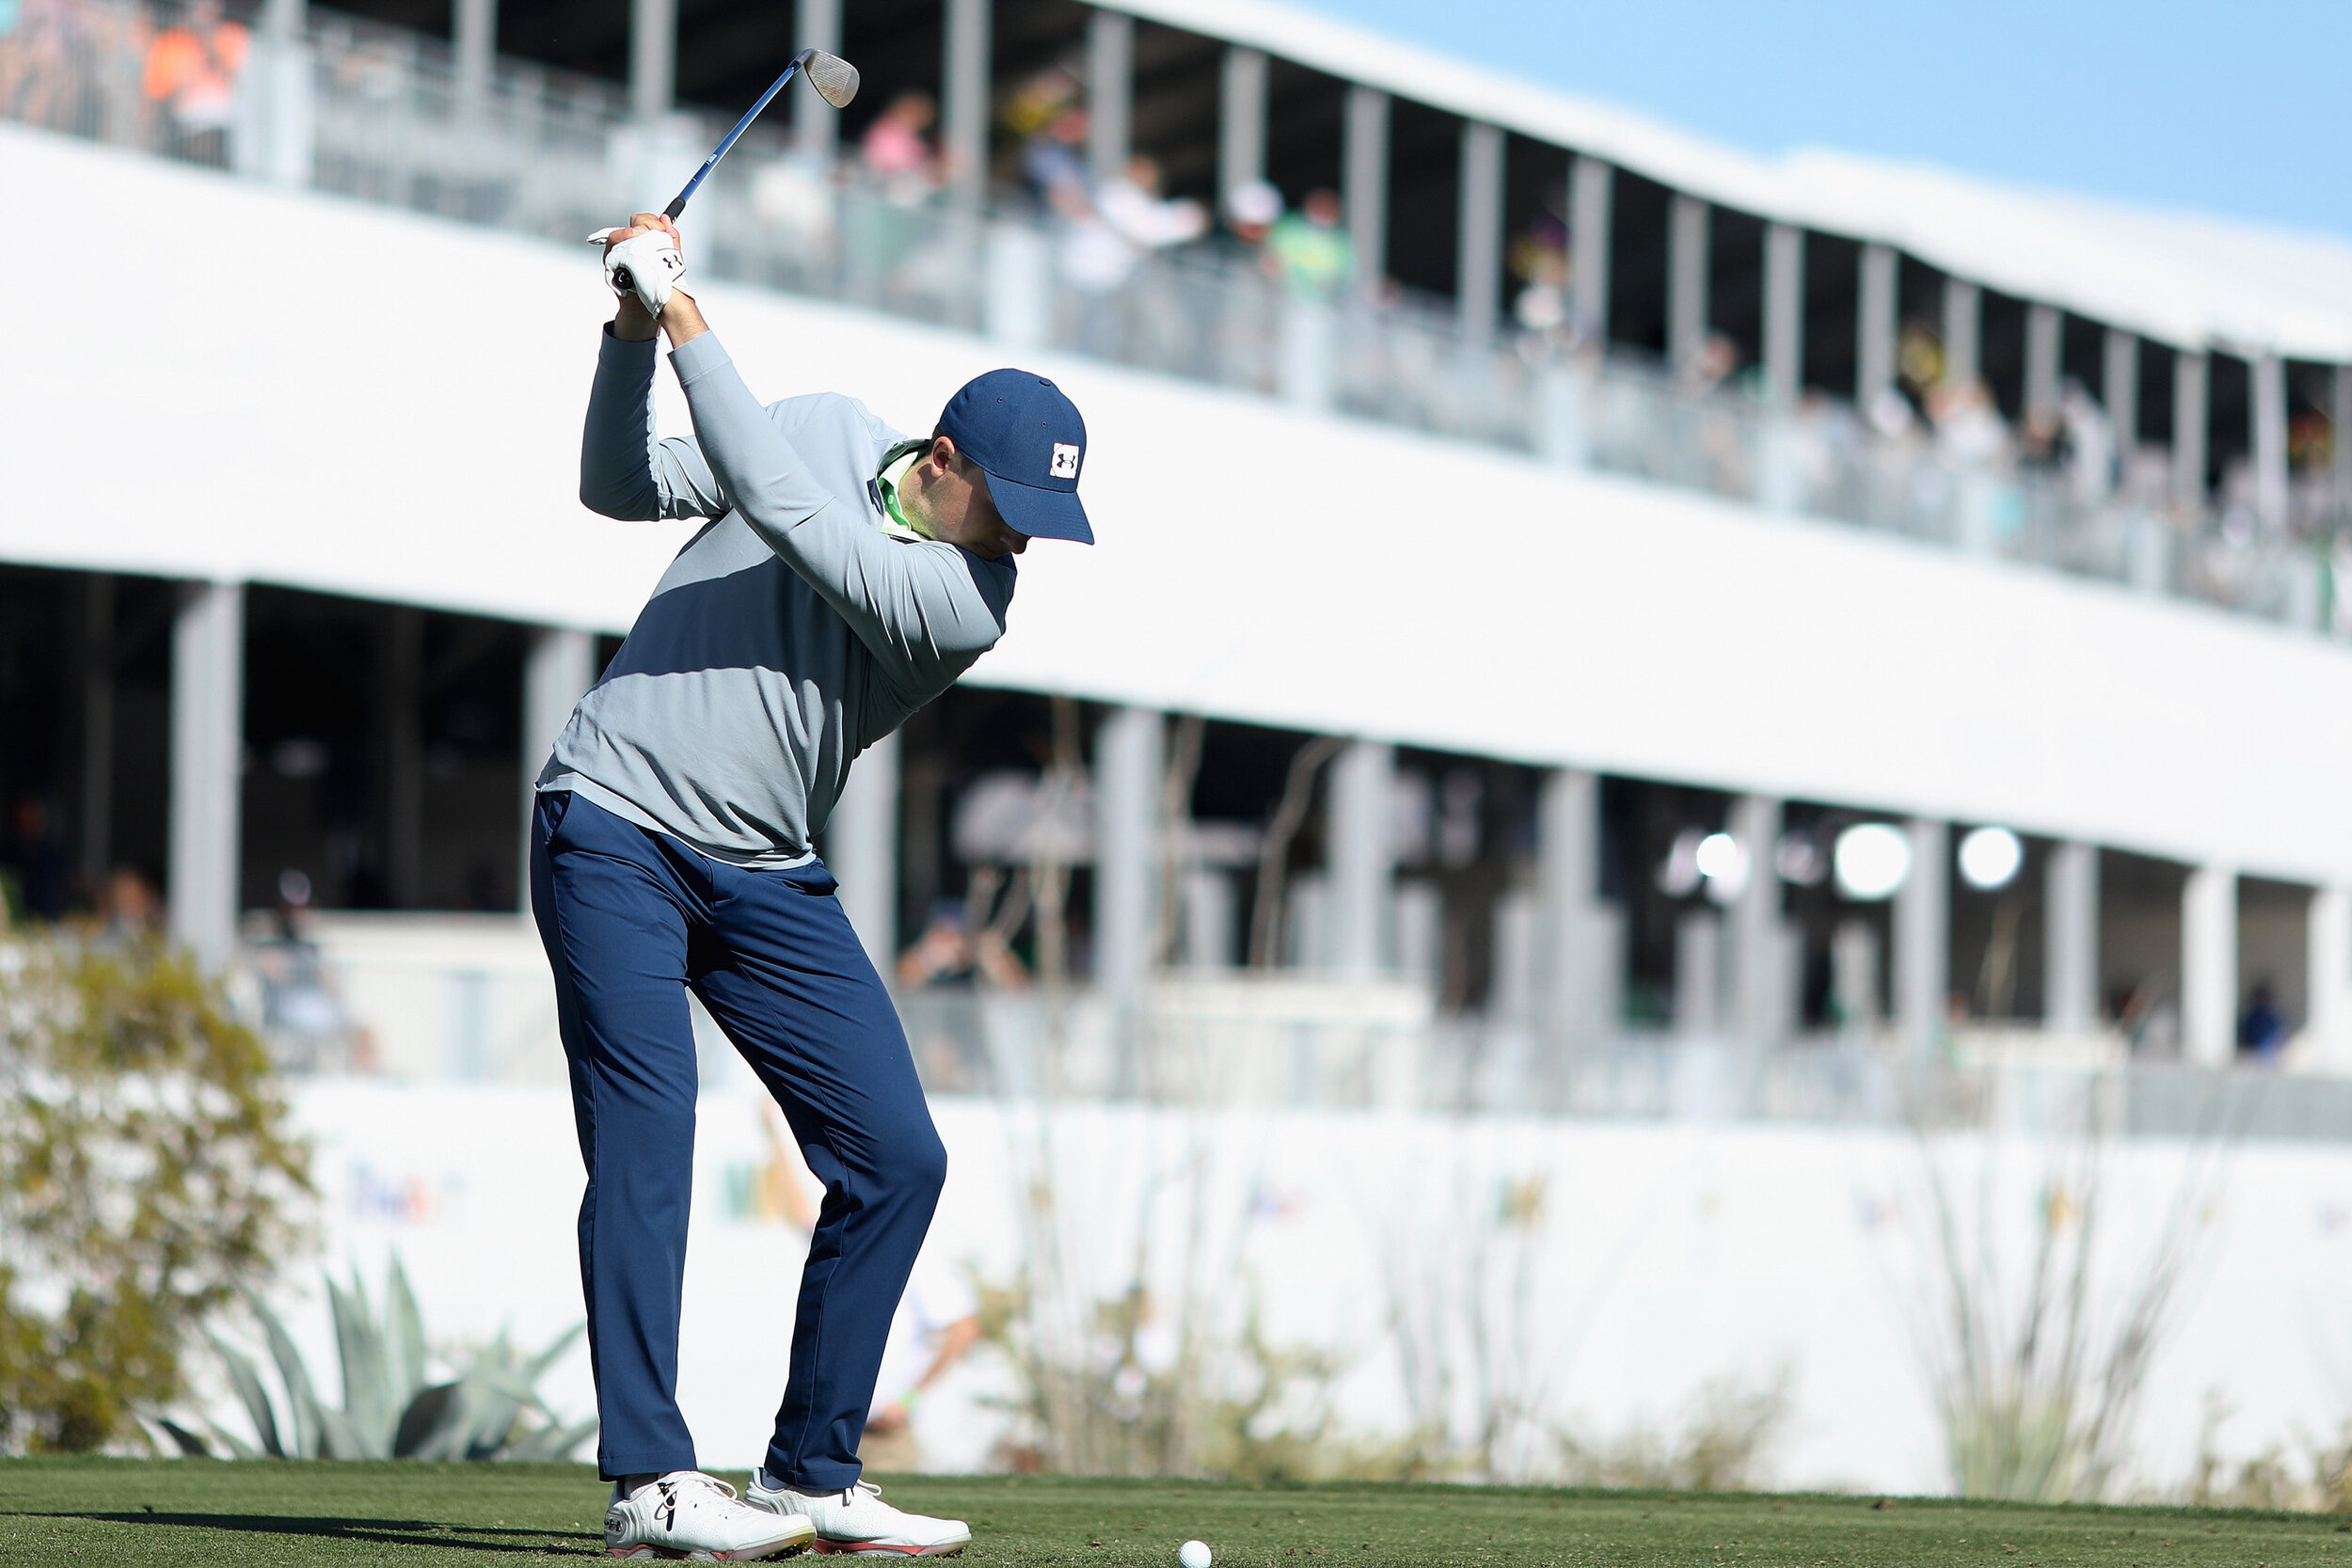  SCOTTSDALE, ARIZONA - FEBRUARY 06: Jordan Spieth of the United States hits his tee shot on the 16th hole during the third round of the Waste Management Phoenix Open at TPC Scottsdale on February 06, 2021 in Scottsdale, Arizona. (Photo by Christian P